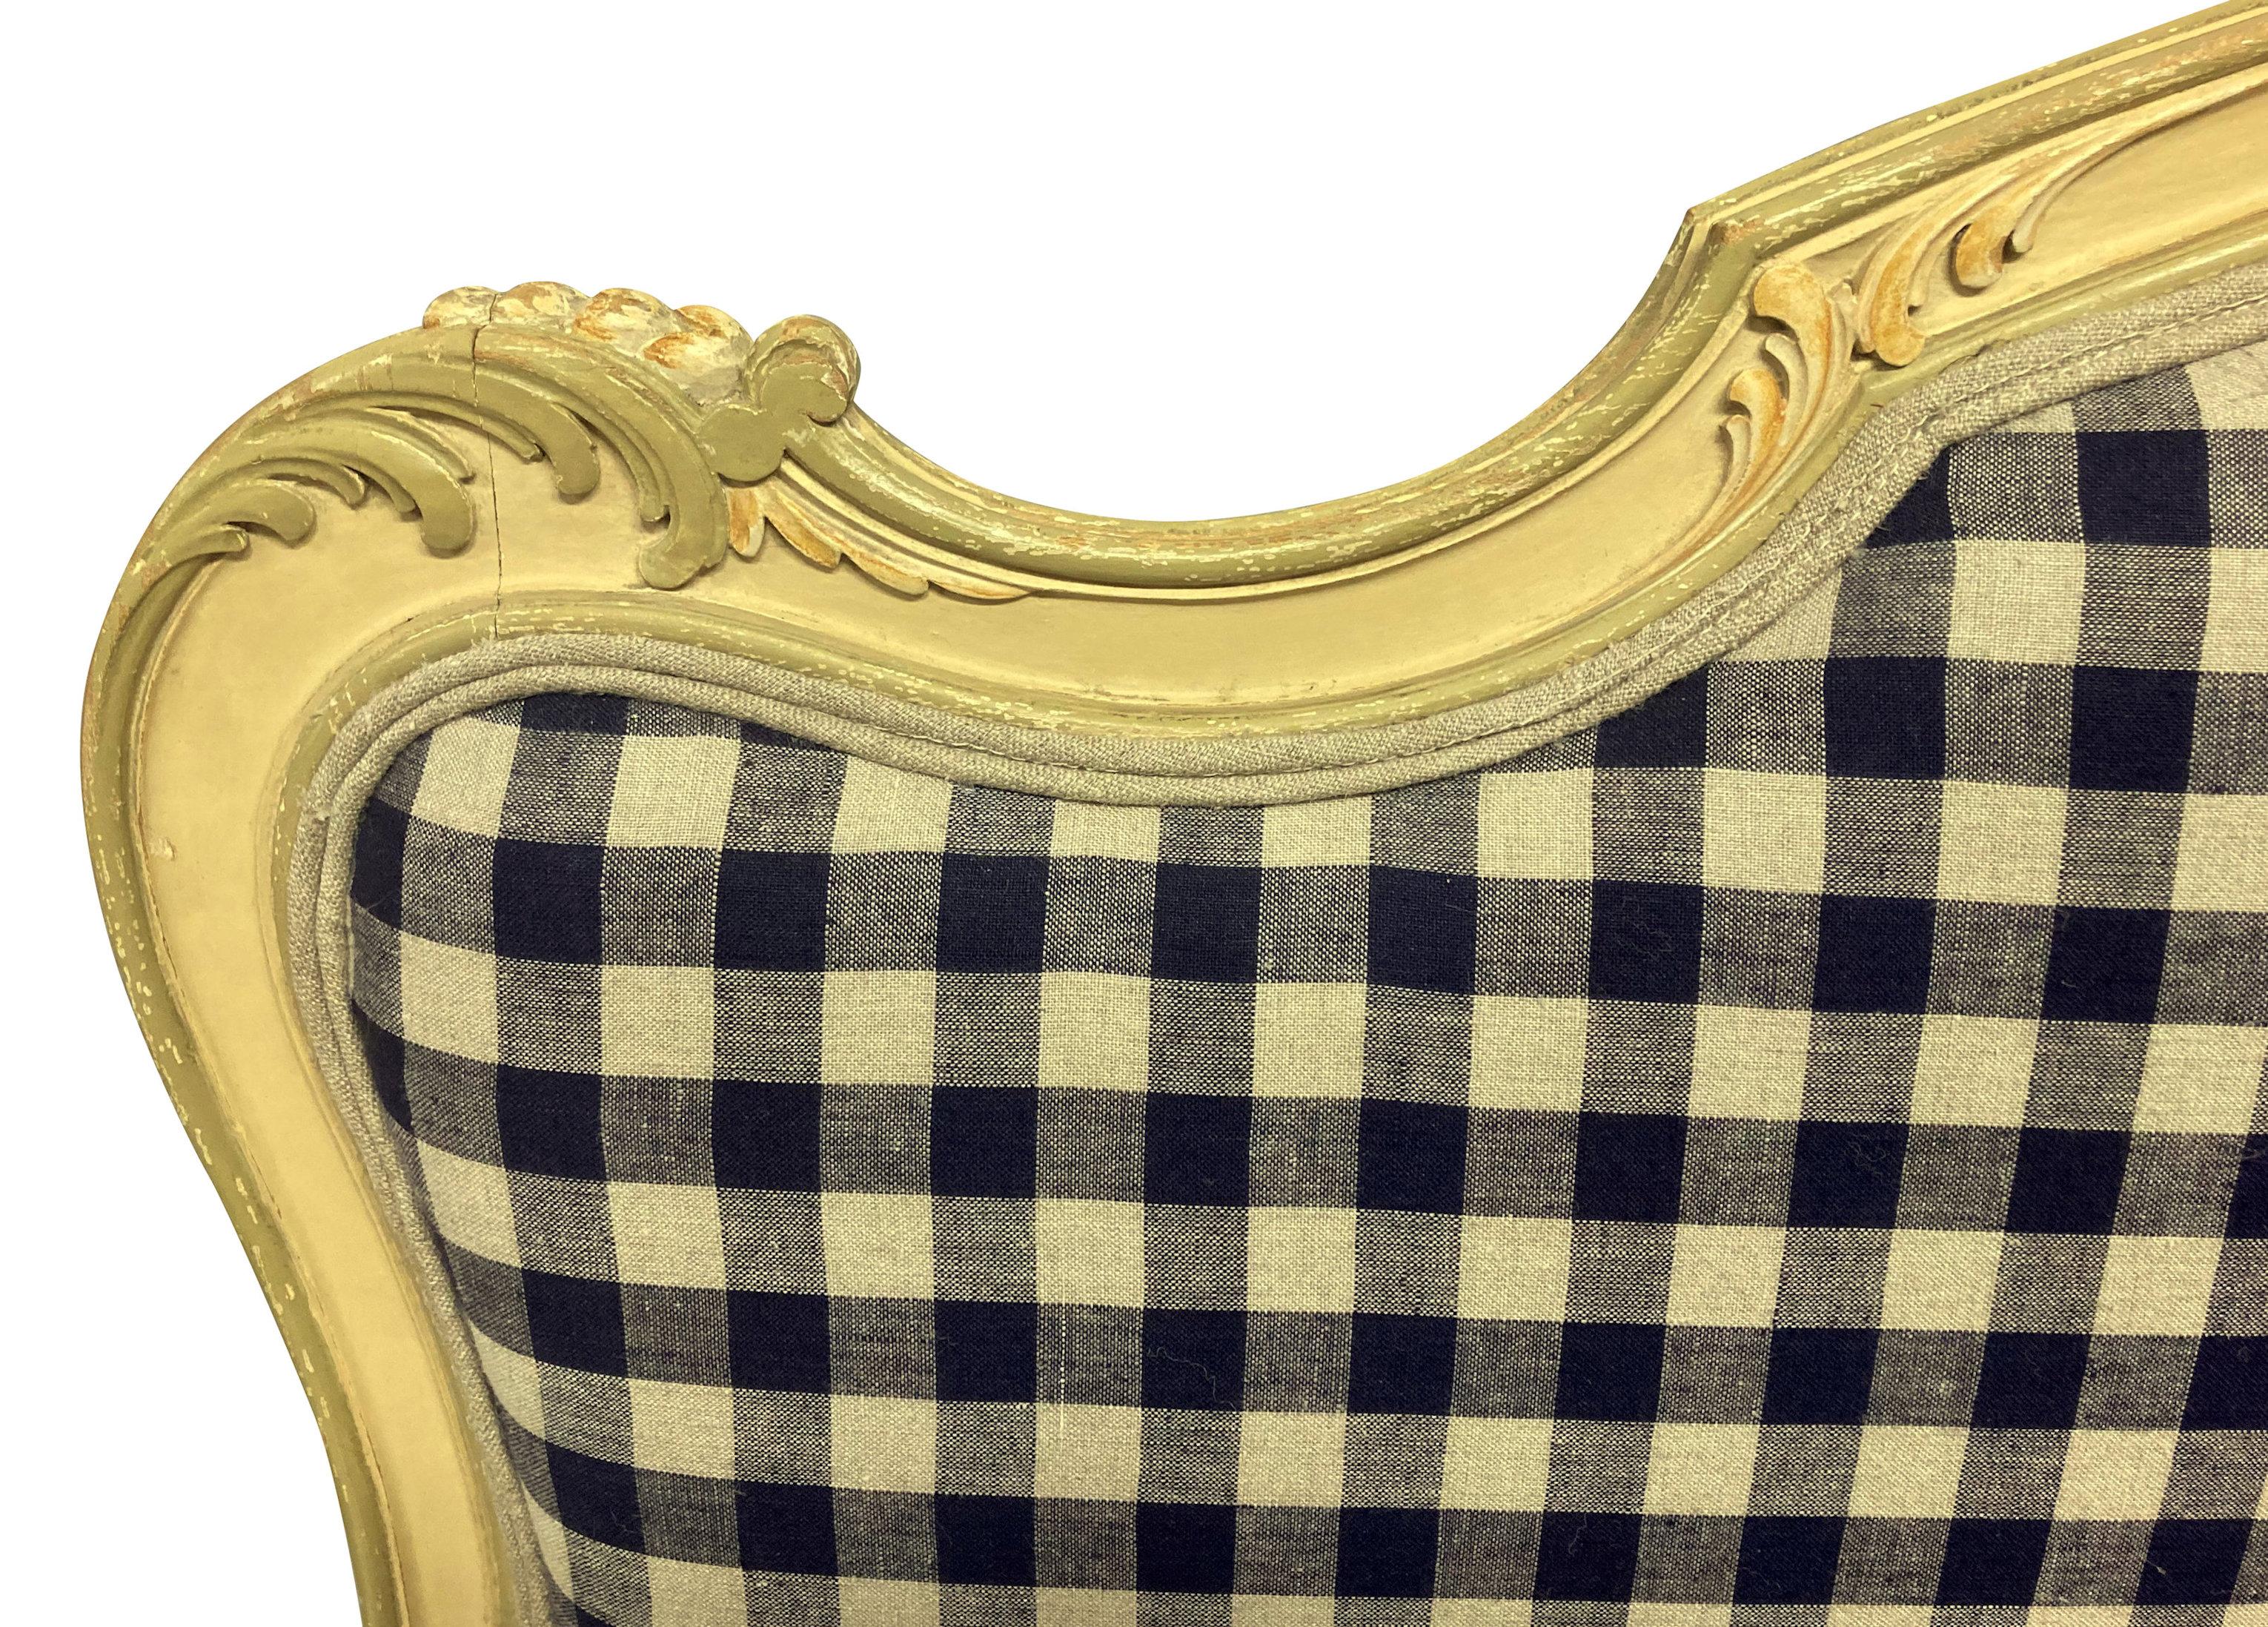 Hand-Painted Painted Louis XV Style Canape in Navy Gingham Linen